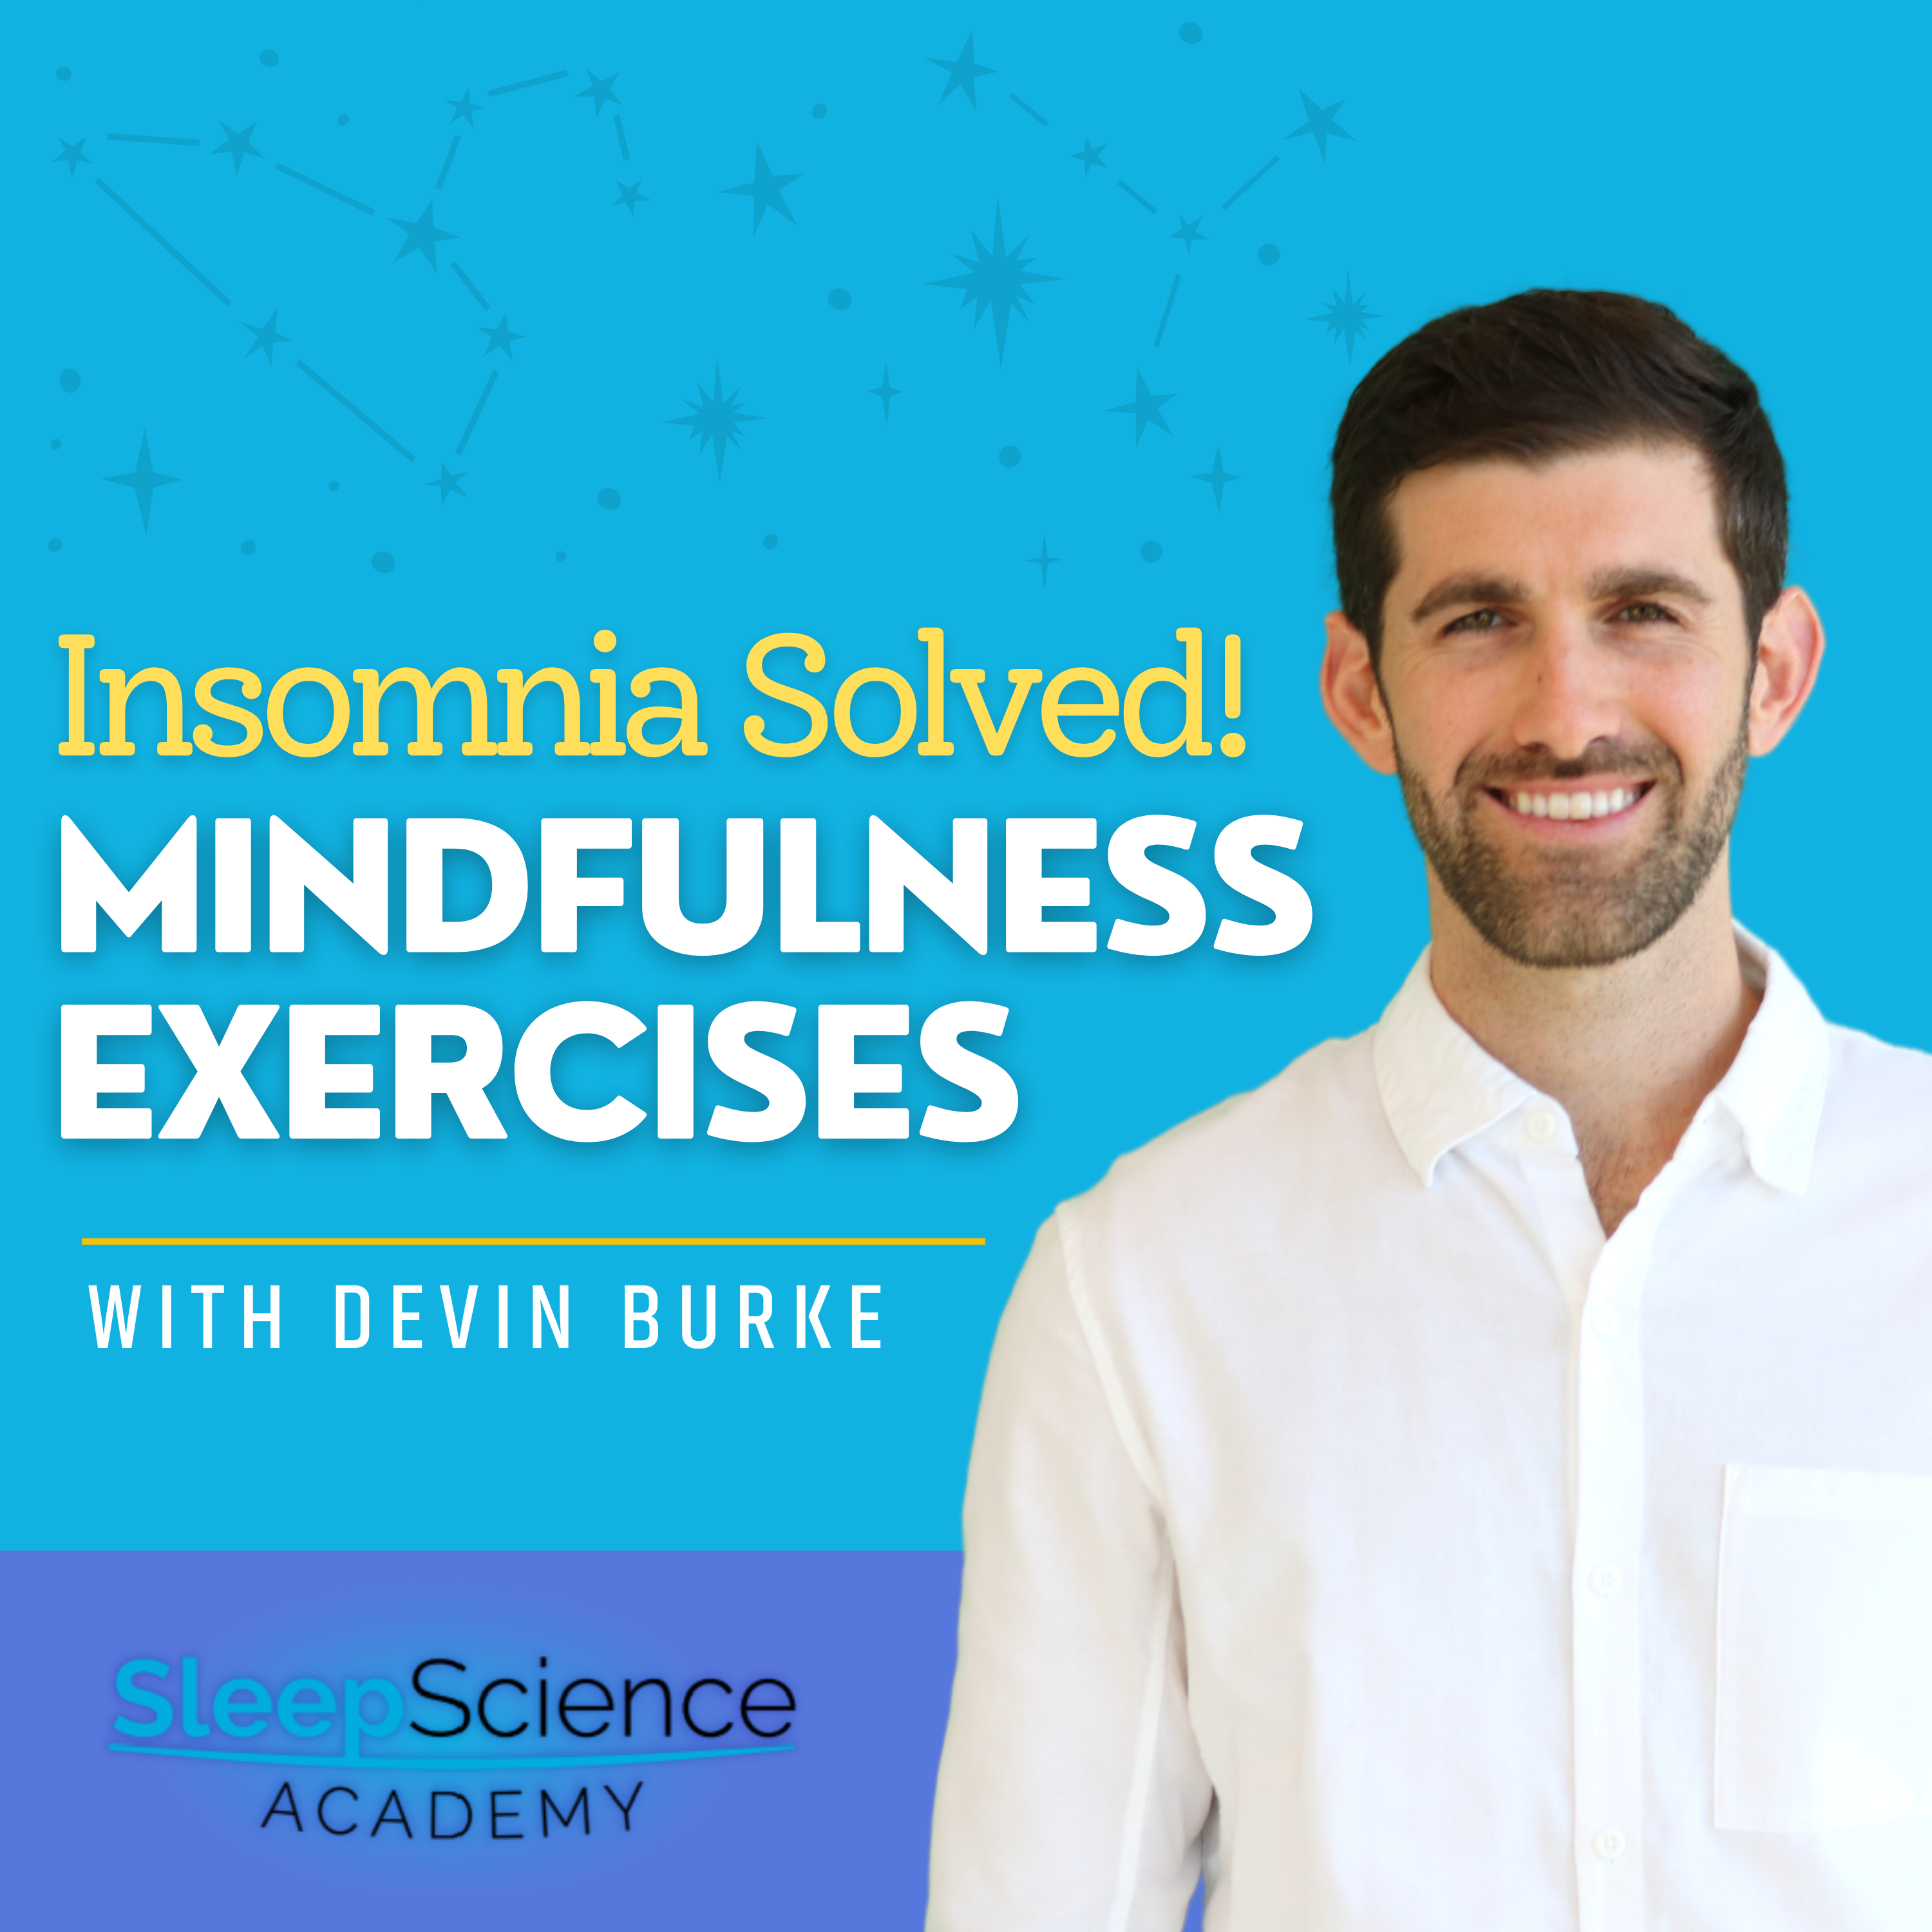 How To Use Mindfulness To Solve Insomnia